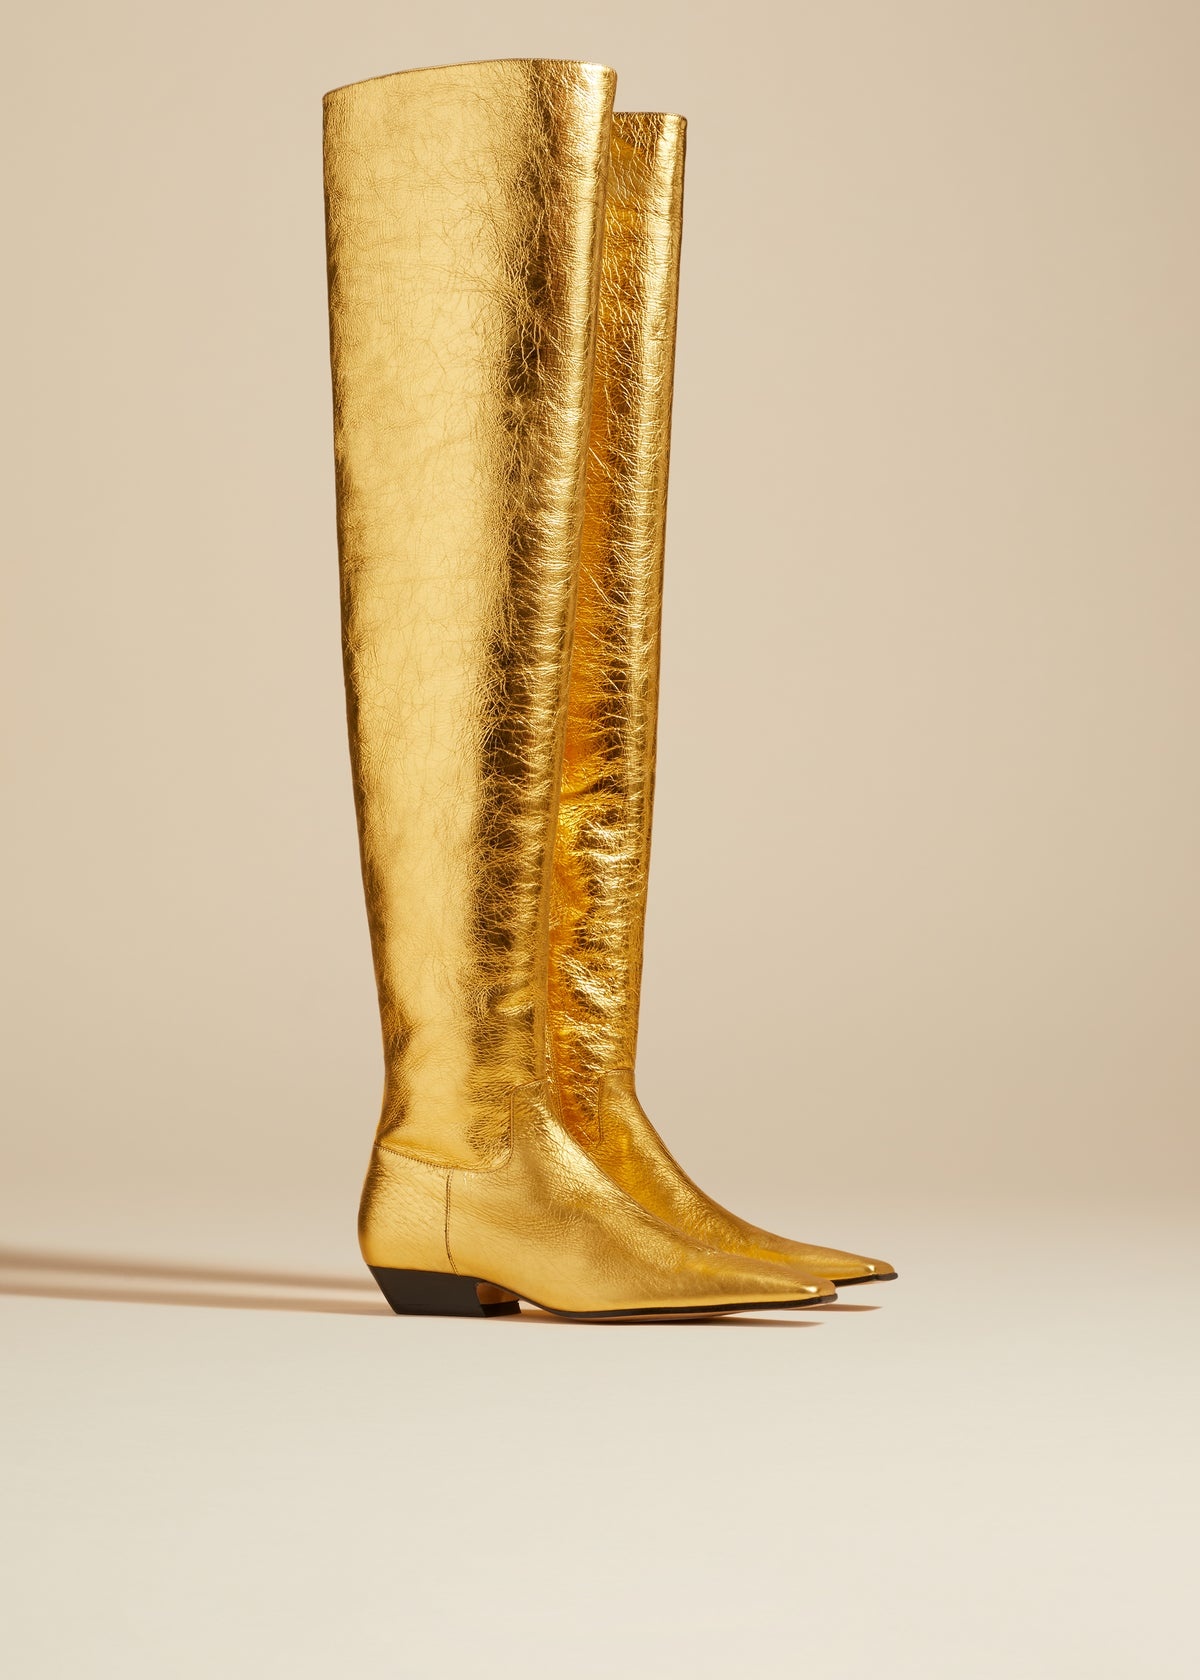 The Marfa Over-the-Knee Flat Boot in Gold Metallic Leather - 2